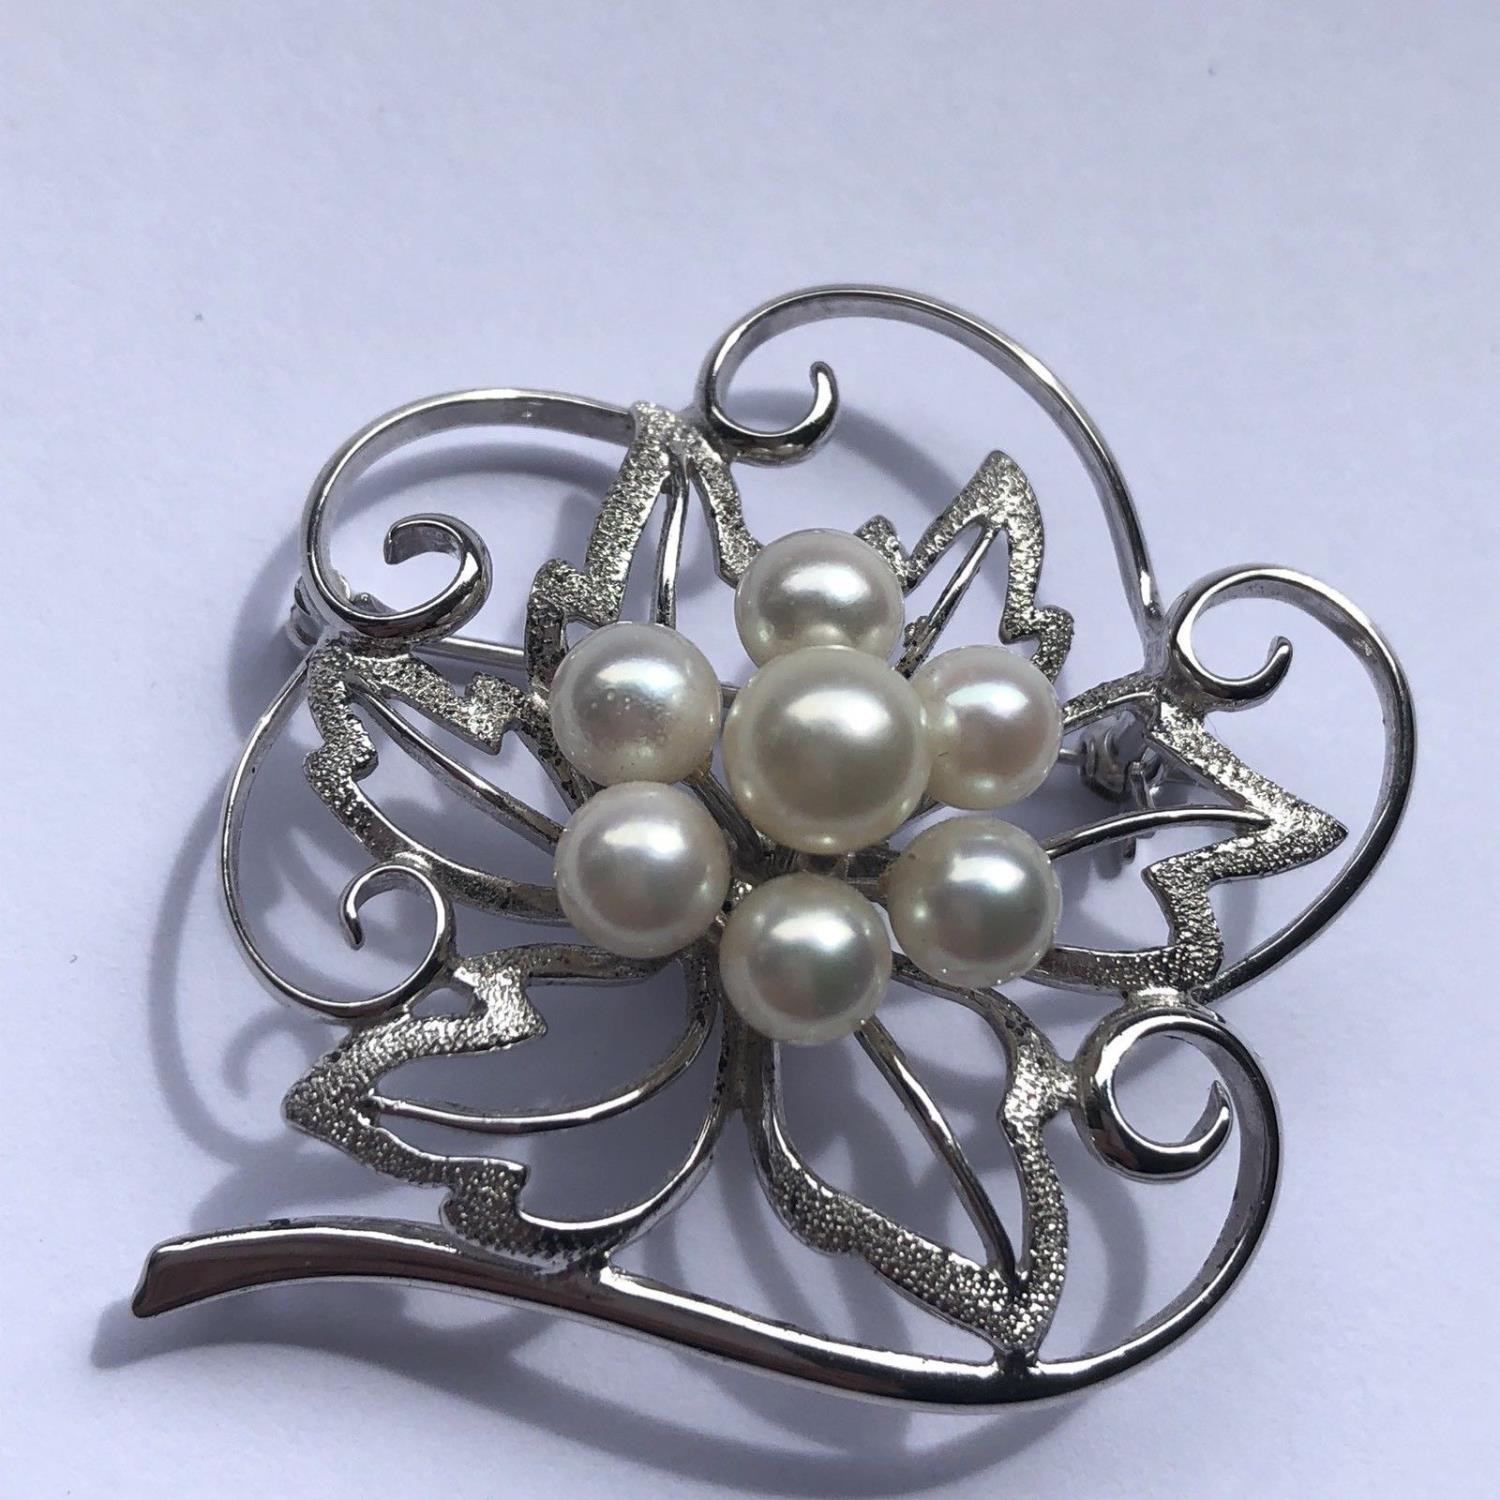 A pretty vintage brooch - solid silver - flower shape with faux pearl cluster